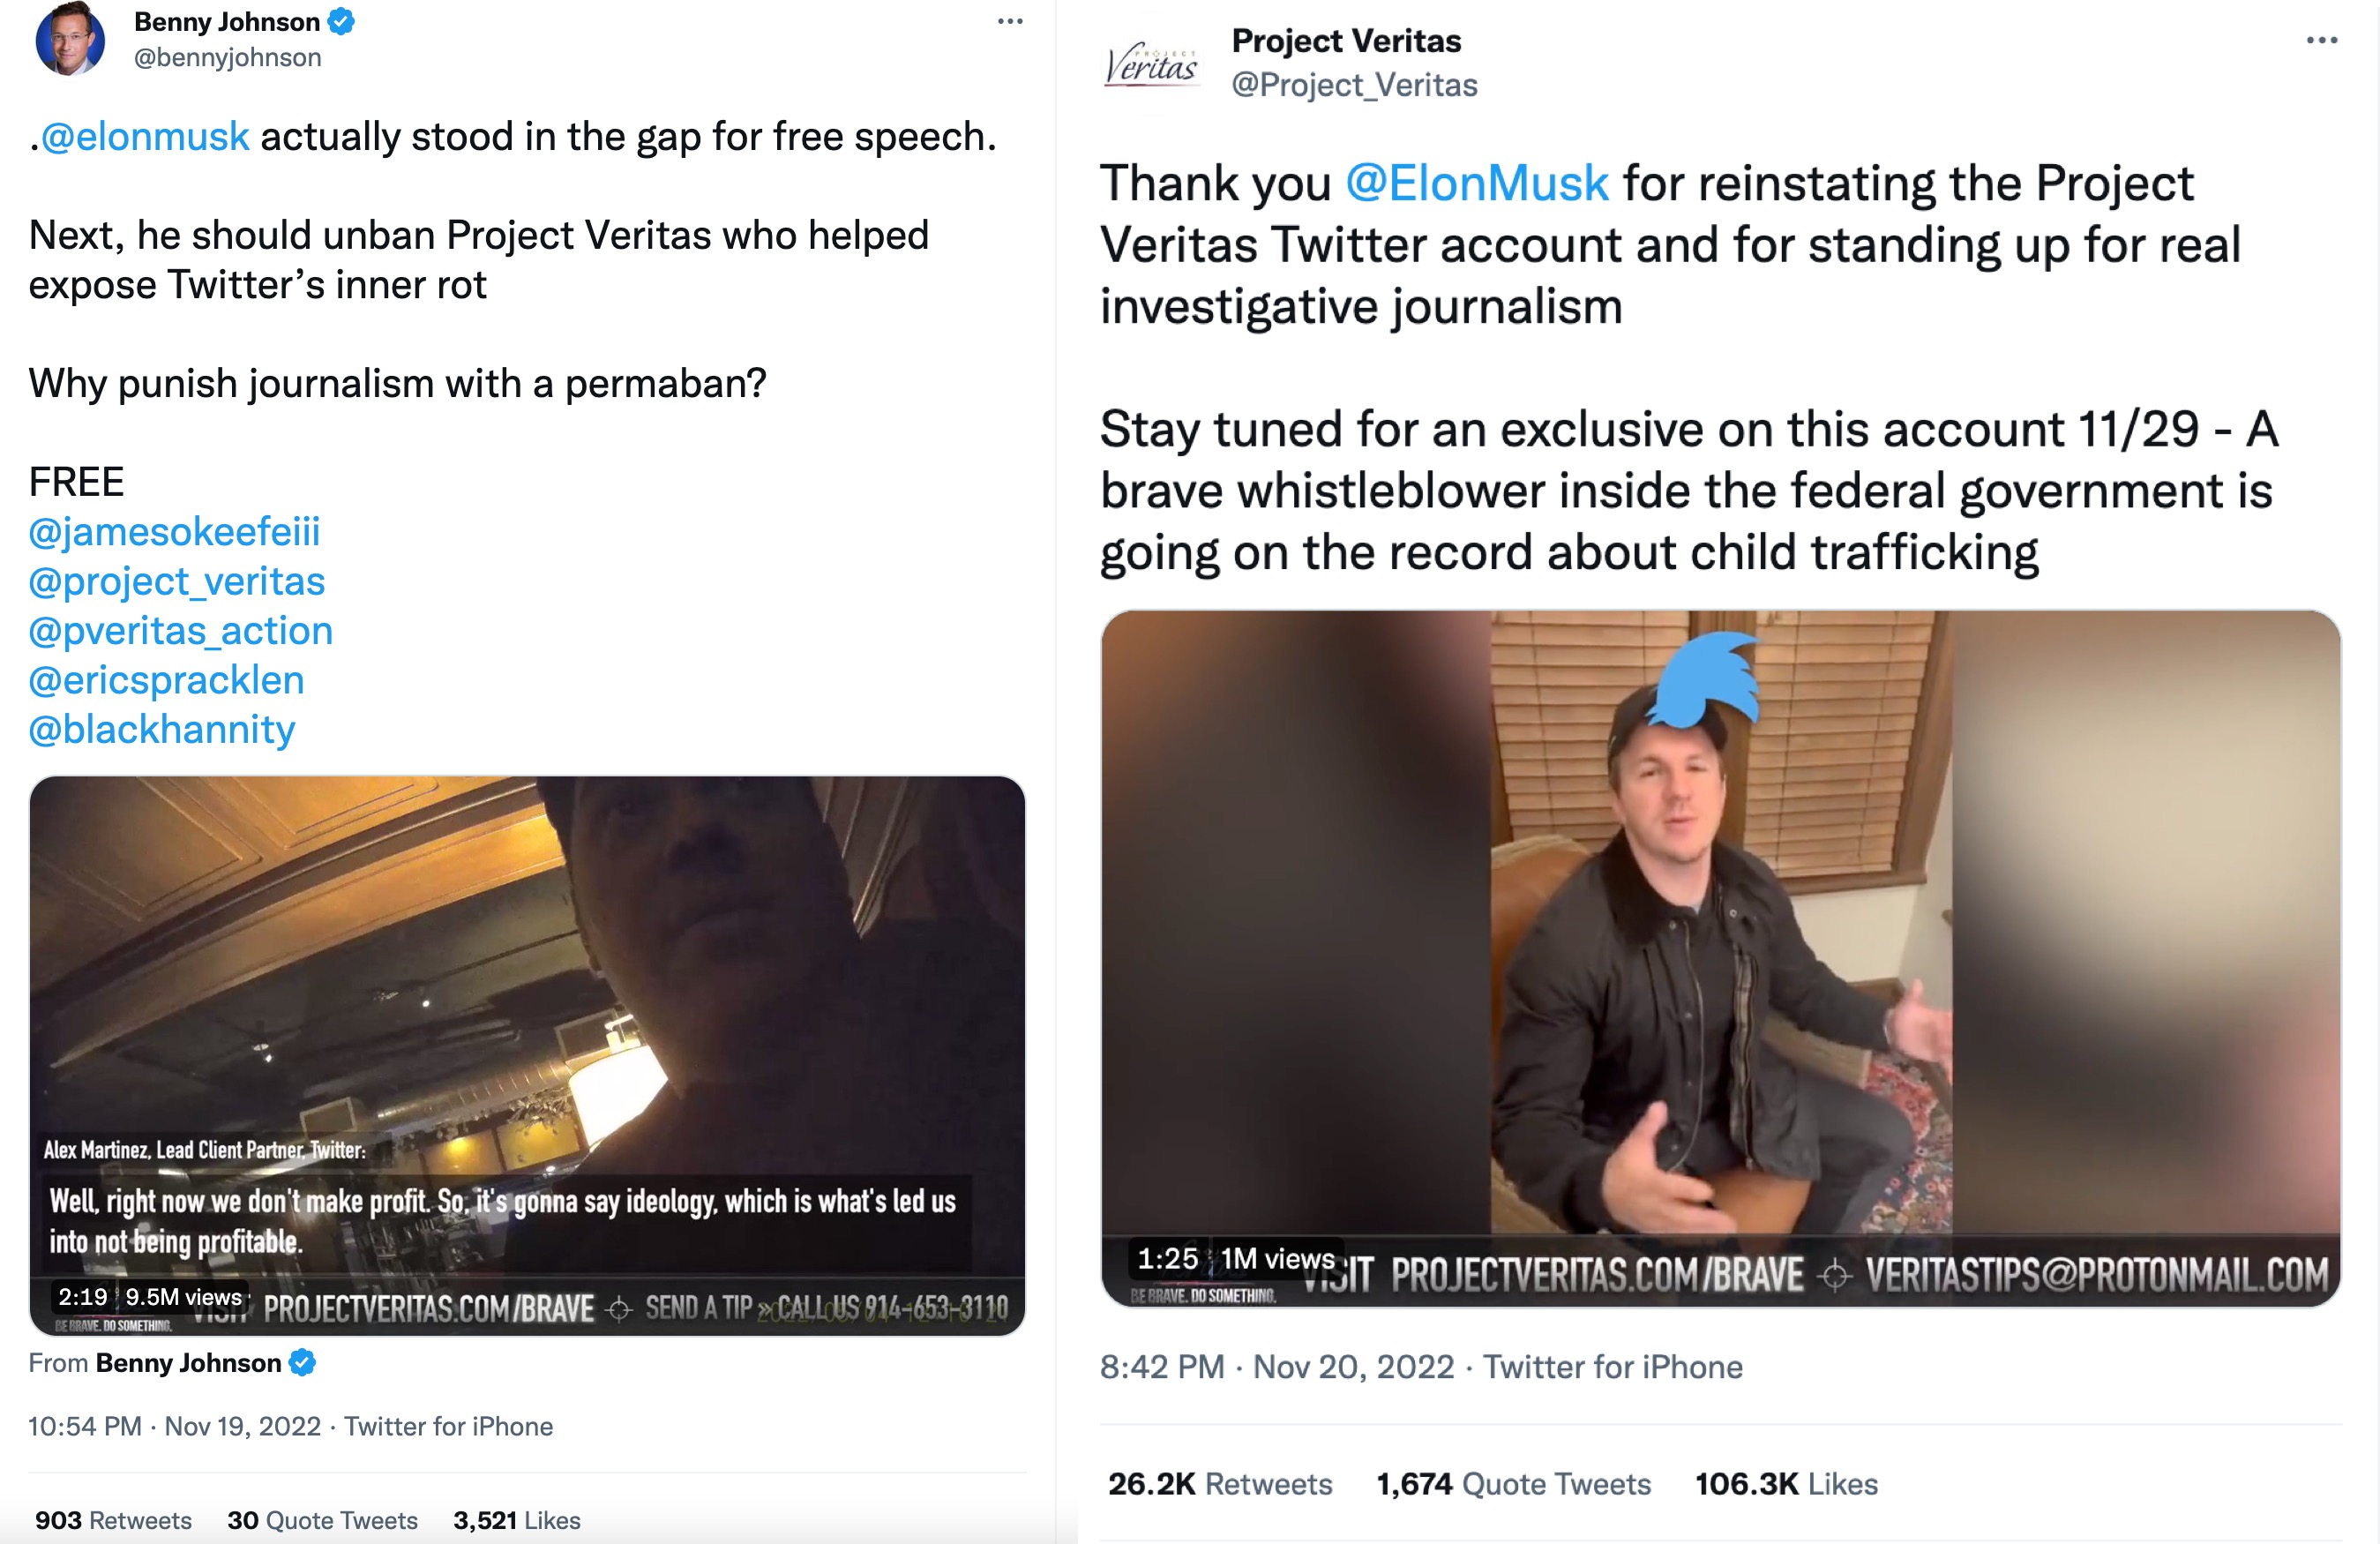 Project Veritas back on Twitter